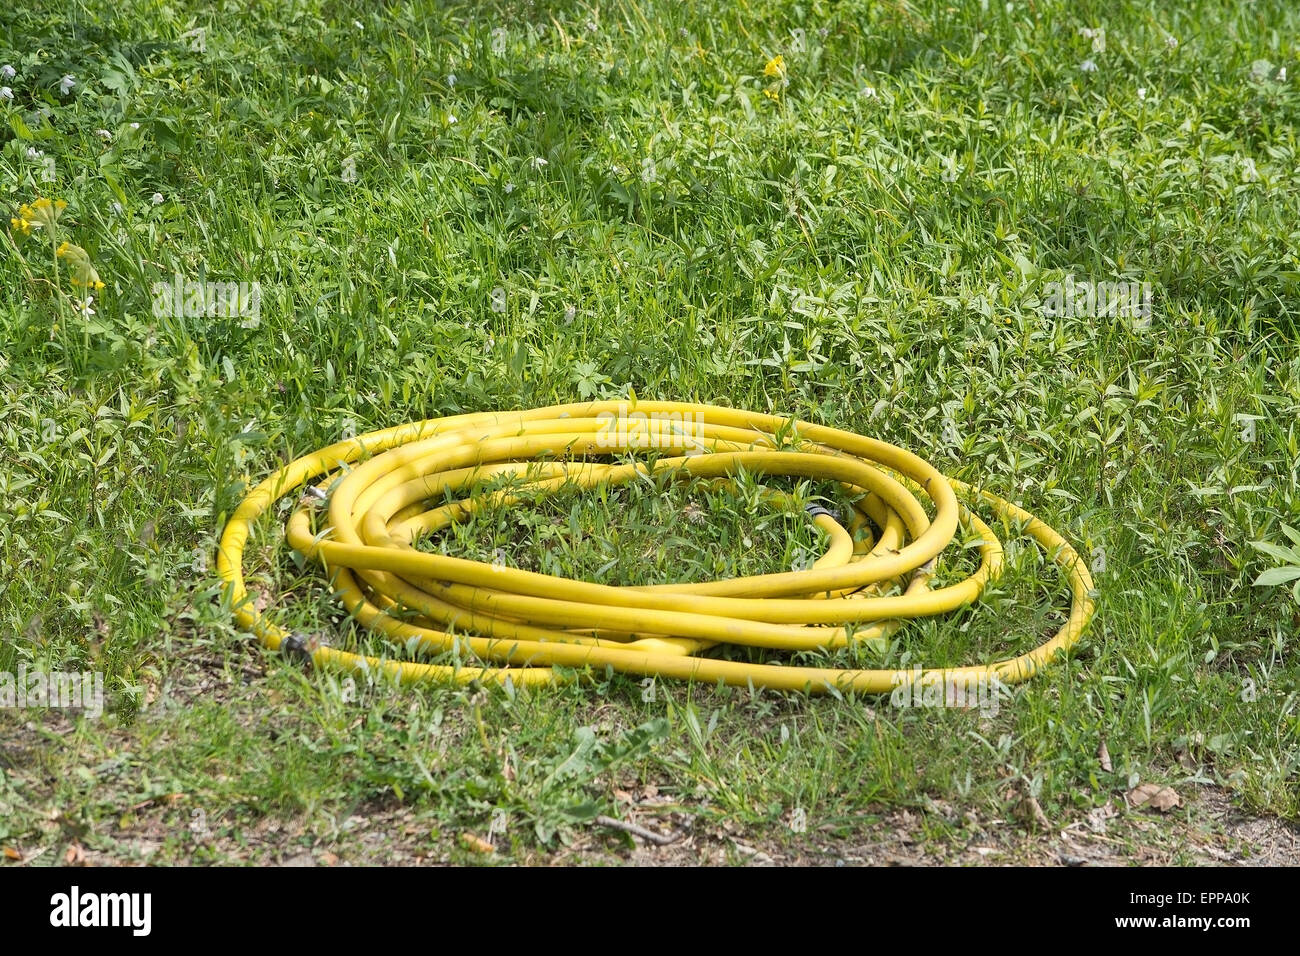 Yellow Hose and hose reel in natural garden setting Stock Photo - Alamy